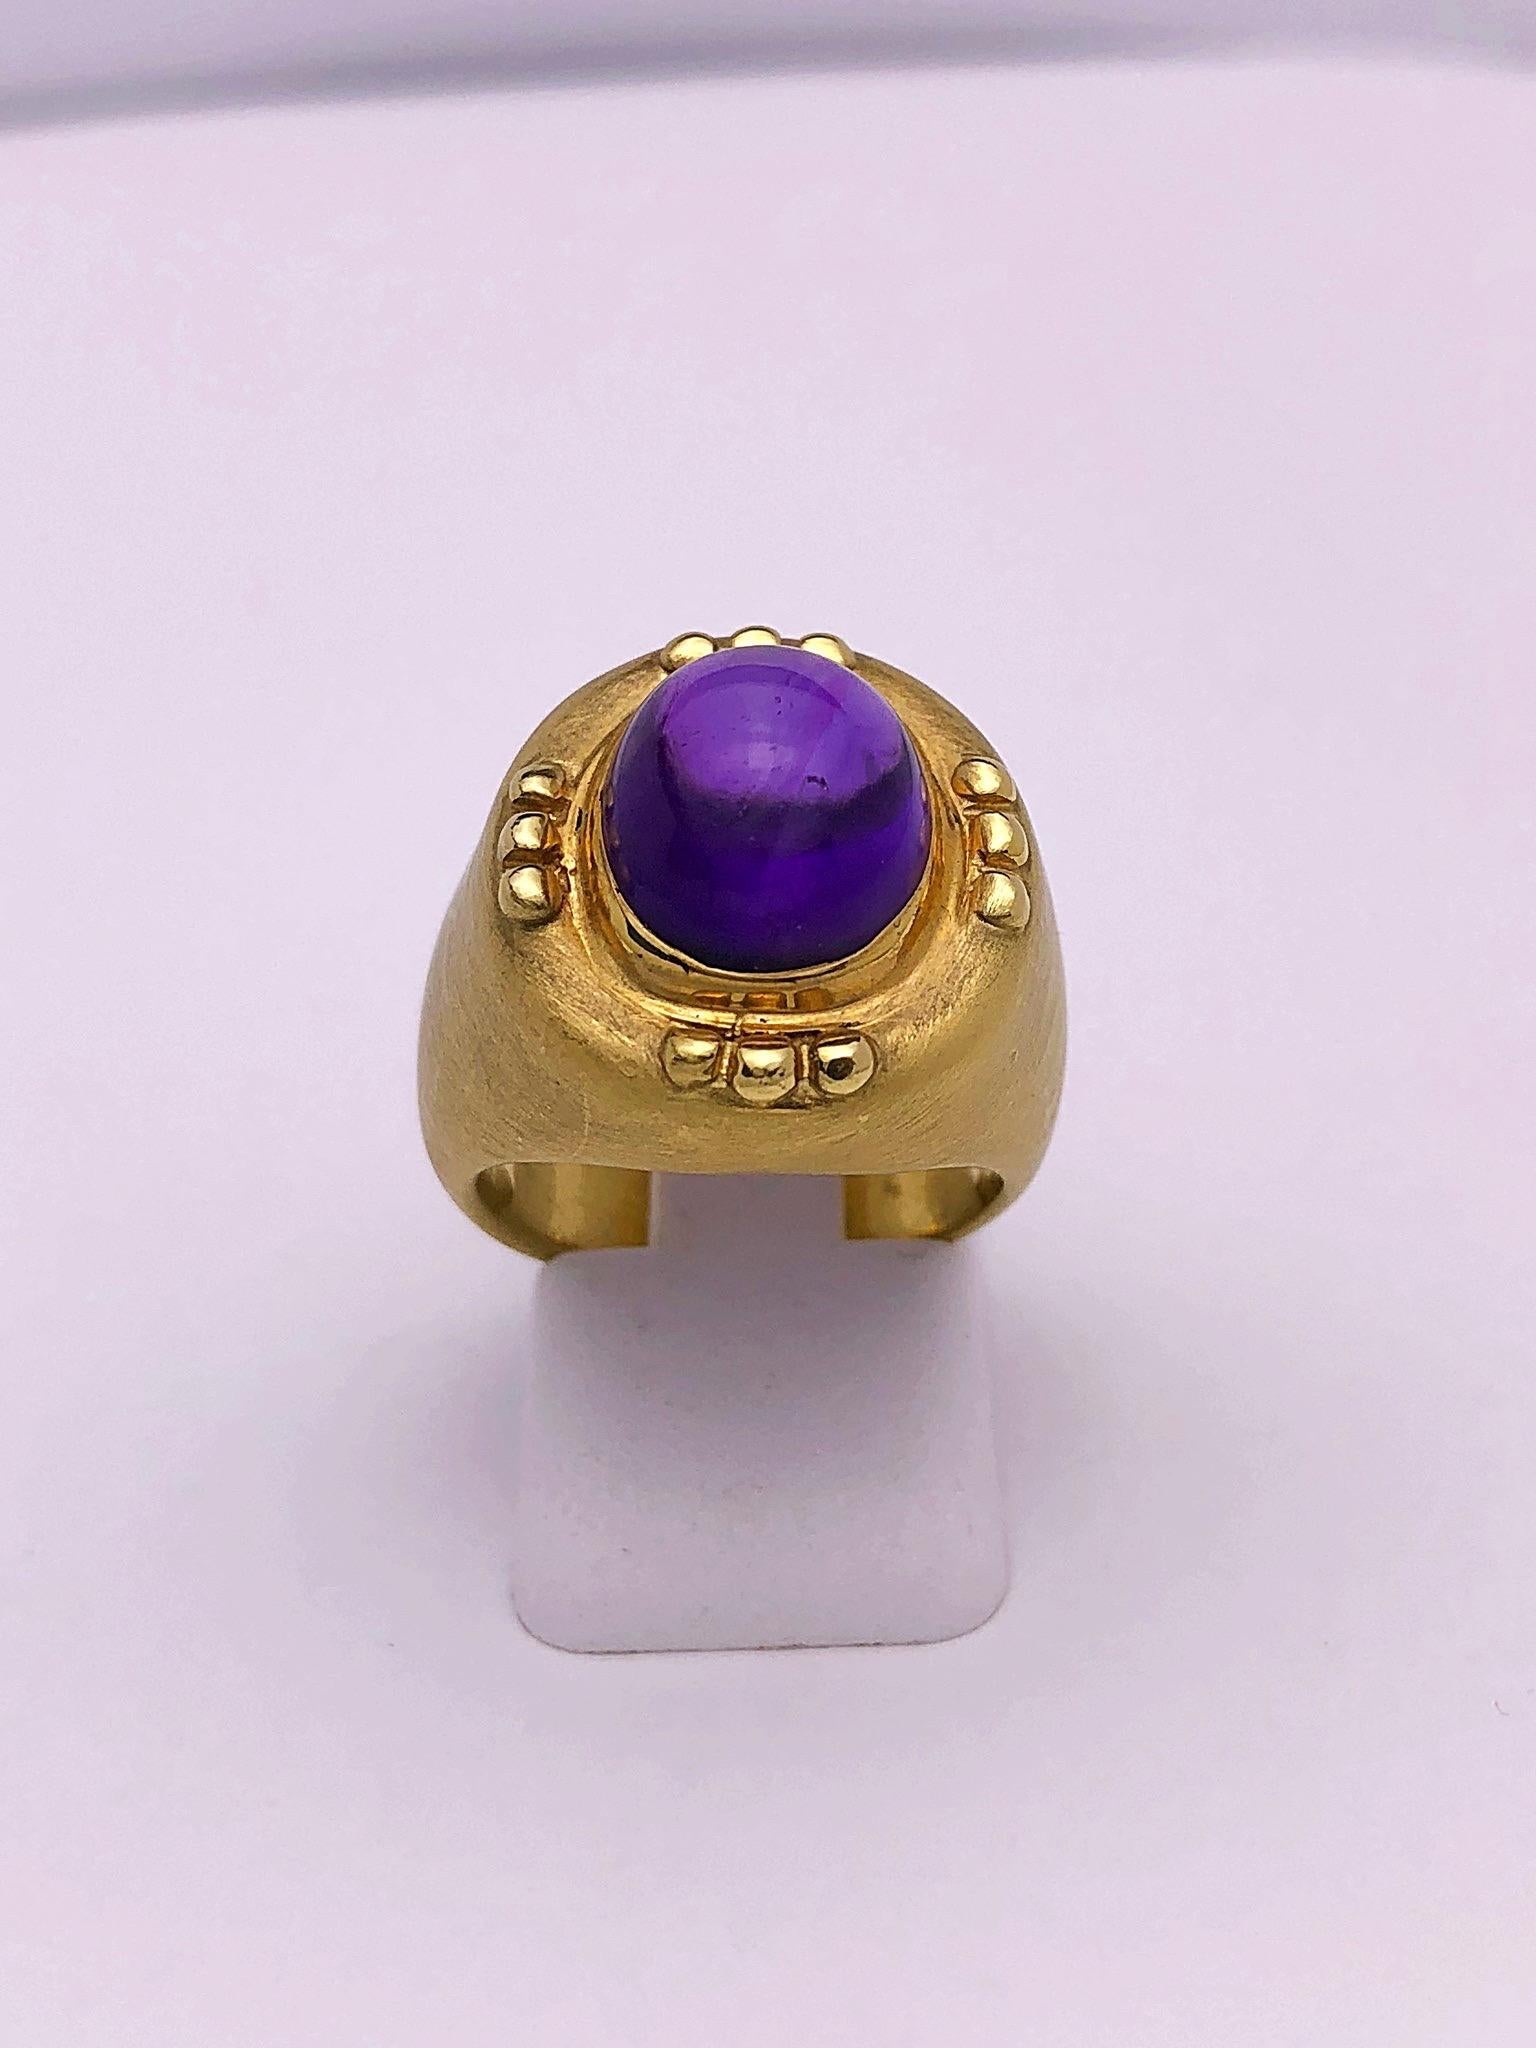 Contemporary 18 Karat Yellow Gold Ring with Cabochon Oval Amethyst